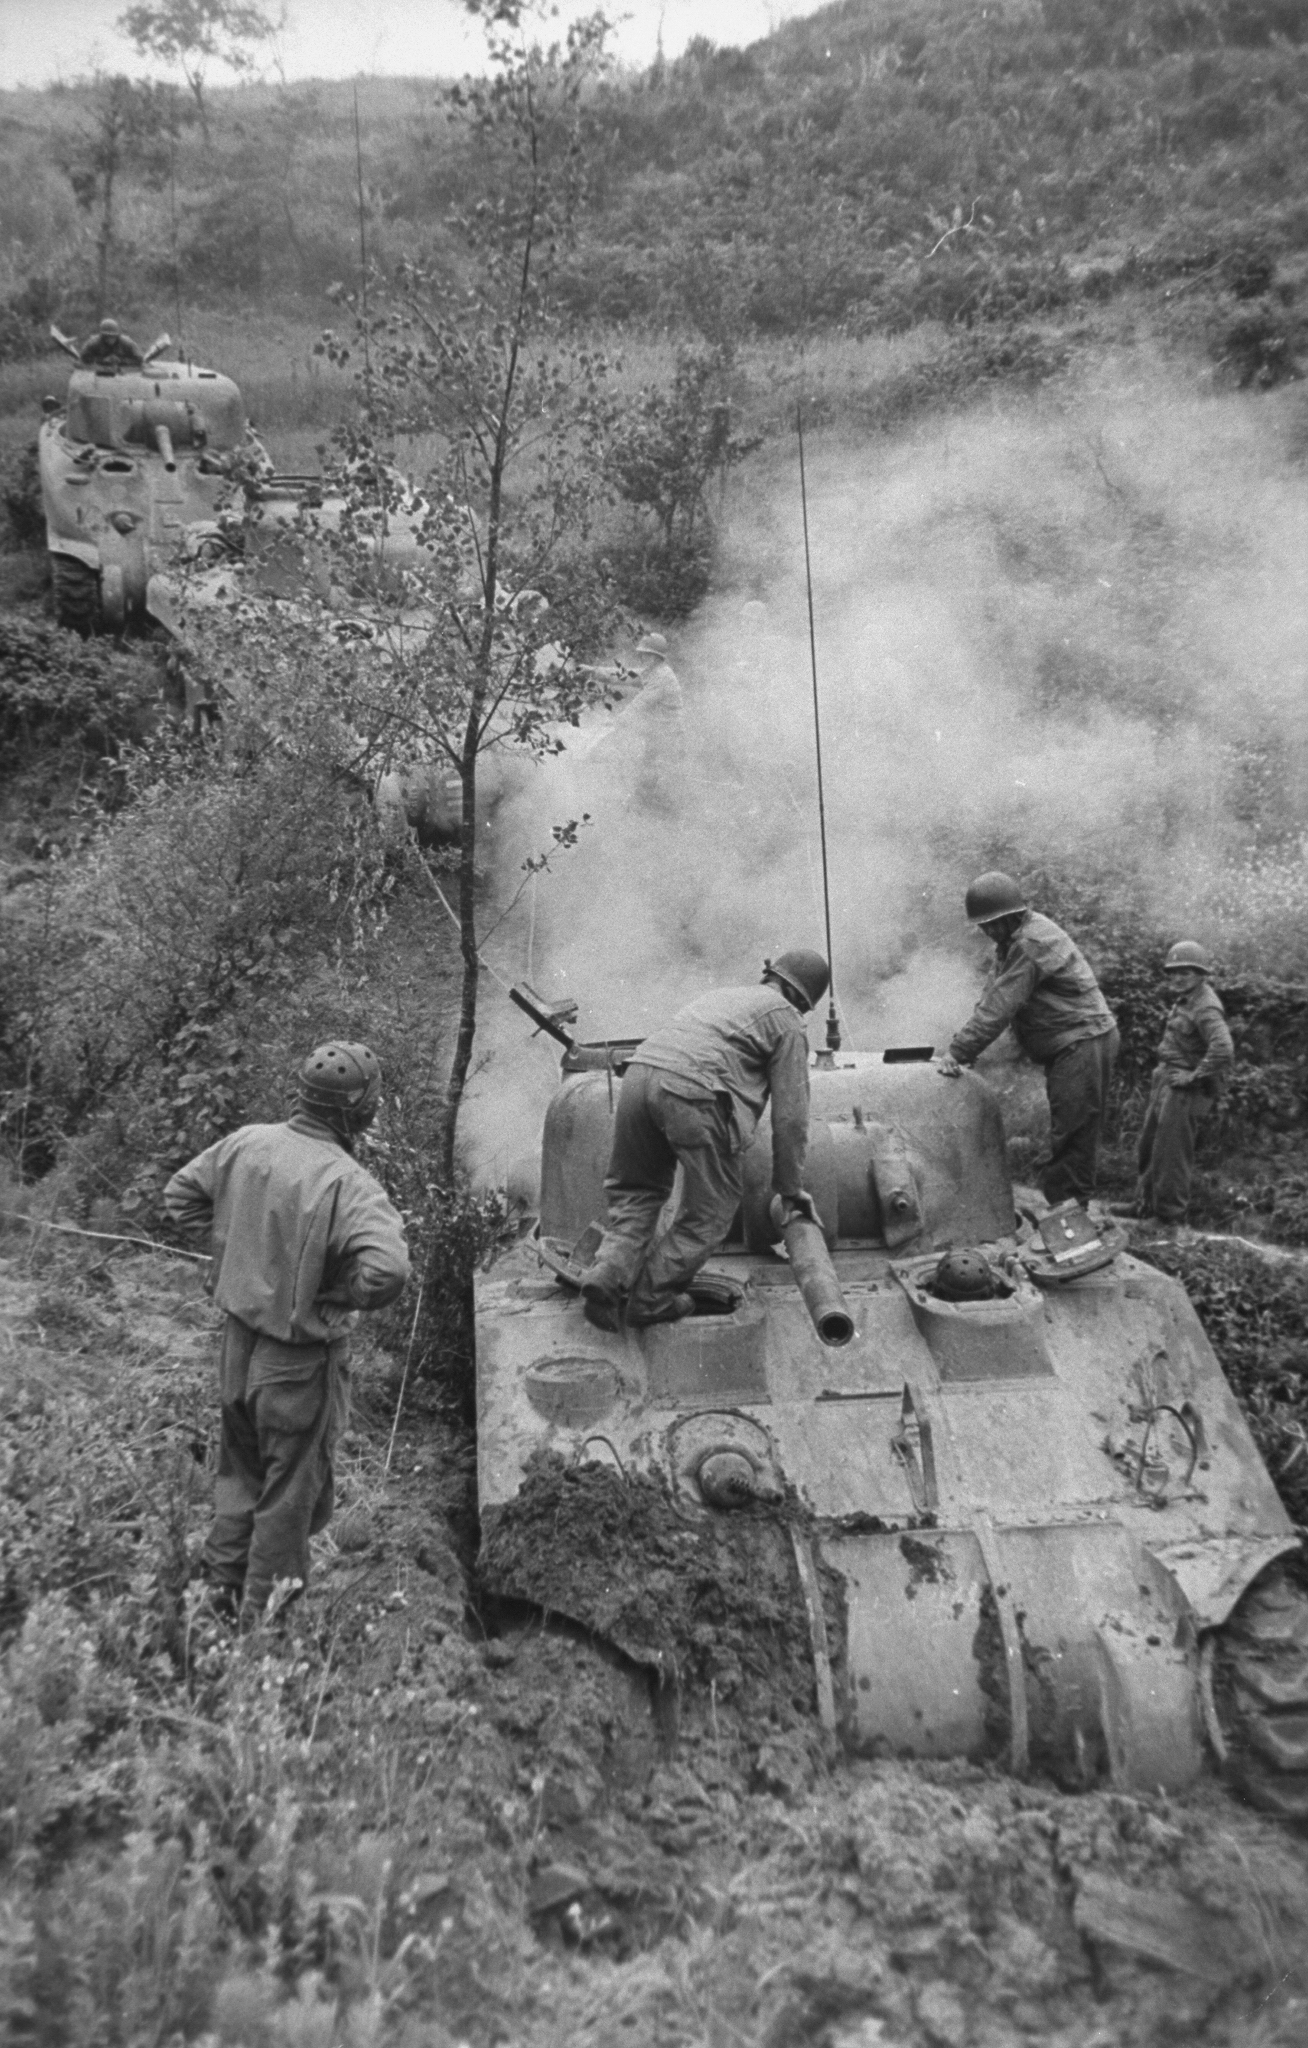 Tank crews fight to free bogged-down M4 Shermans in the countryside near Minturno, Italy, 1944.